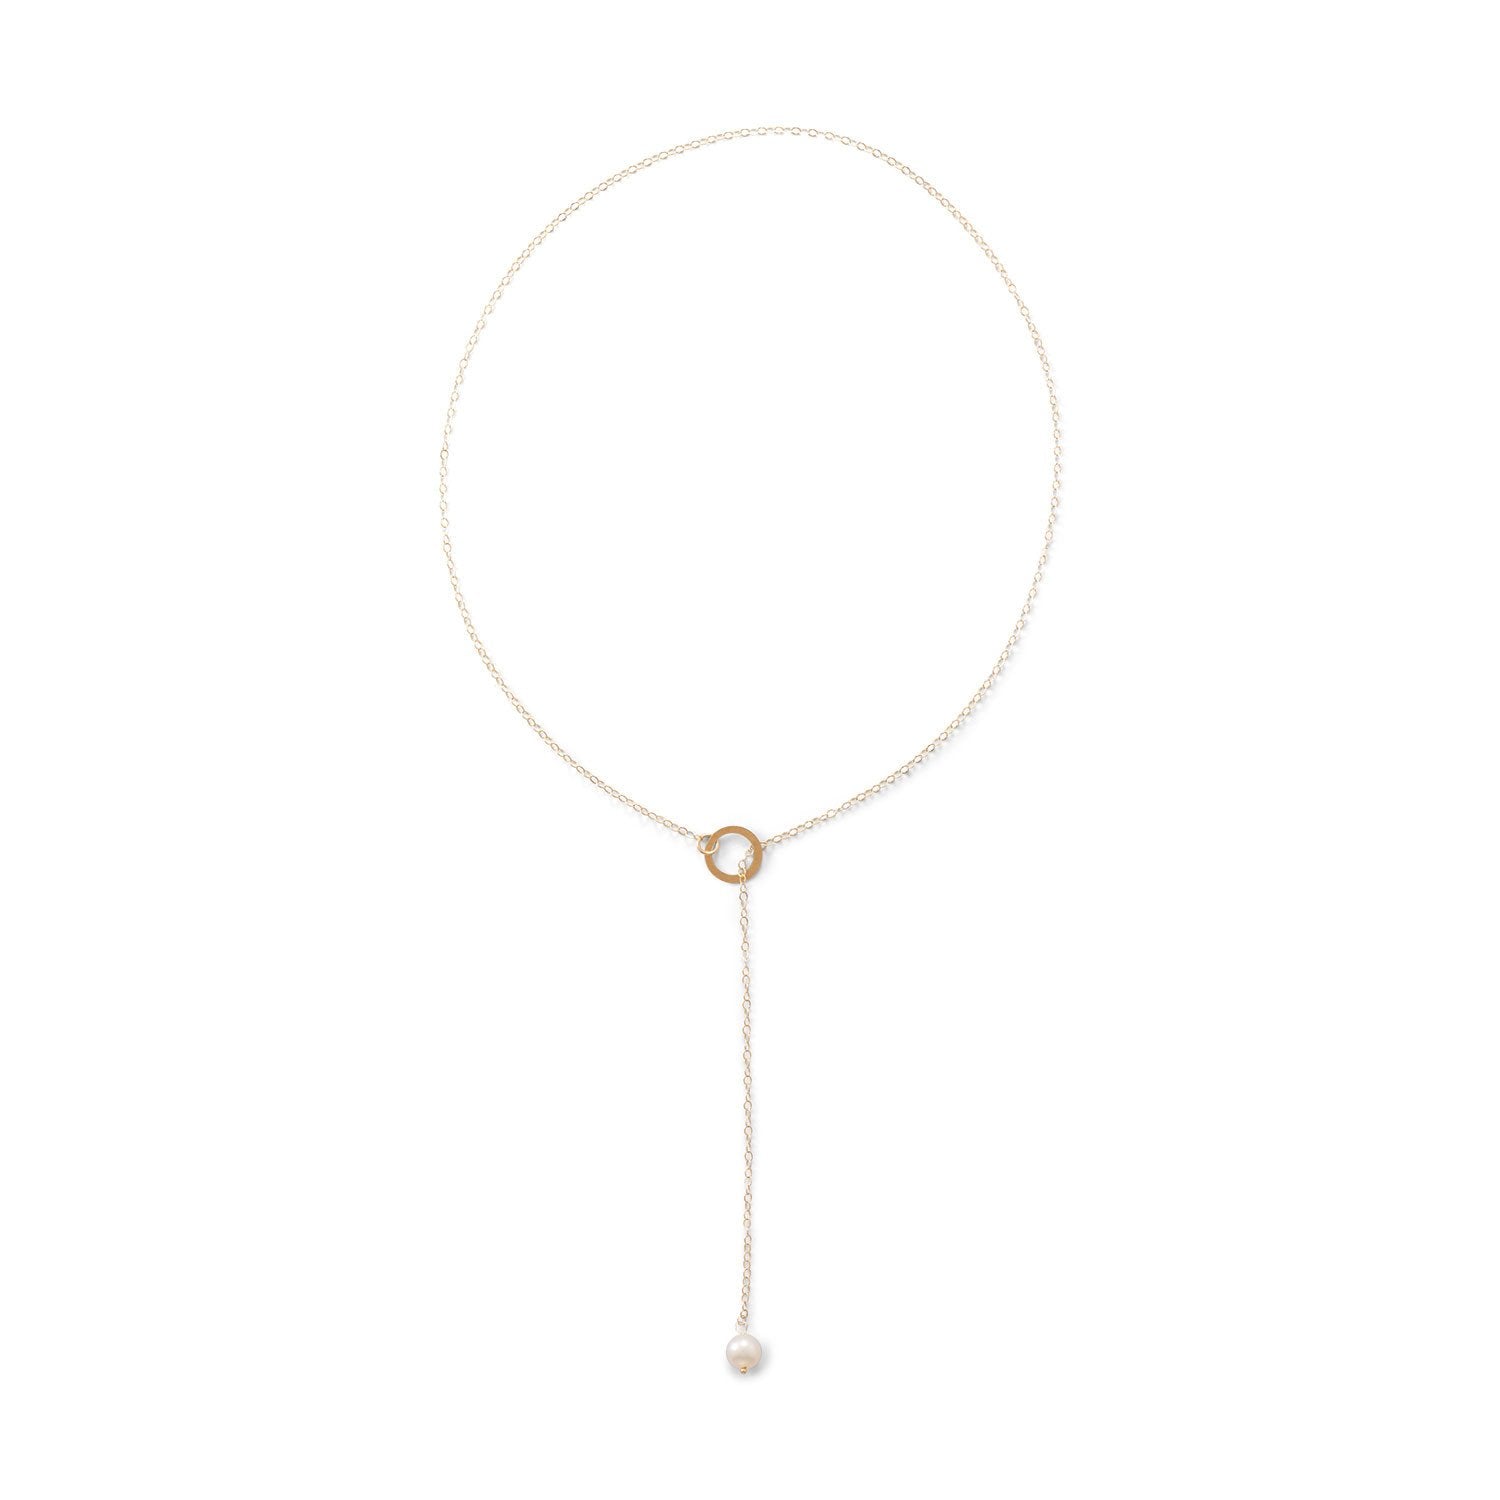 14 Karat Gold Lariat Necklace with Cultured Freshwater Pearl End